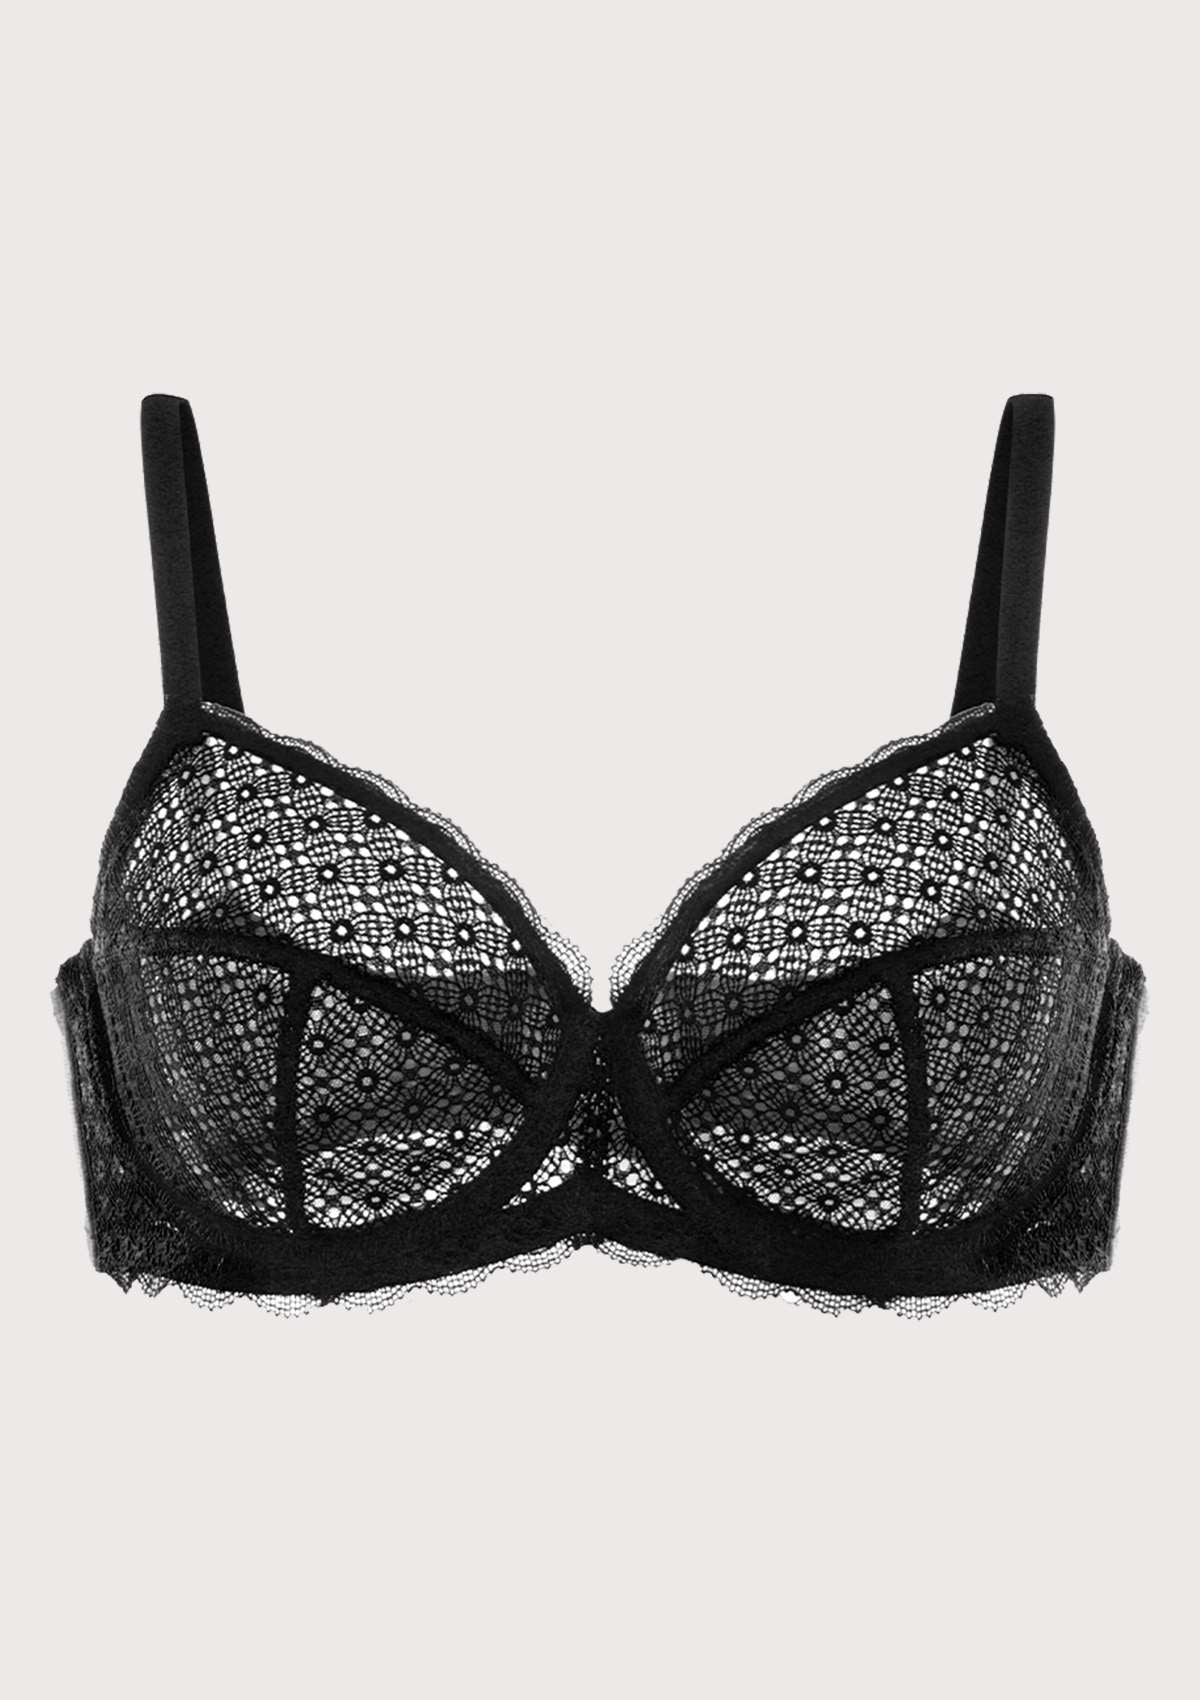 HSIA Seamed Cup Bra: Unlined Lace Bra - Back and Side Smoothing Bra